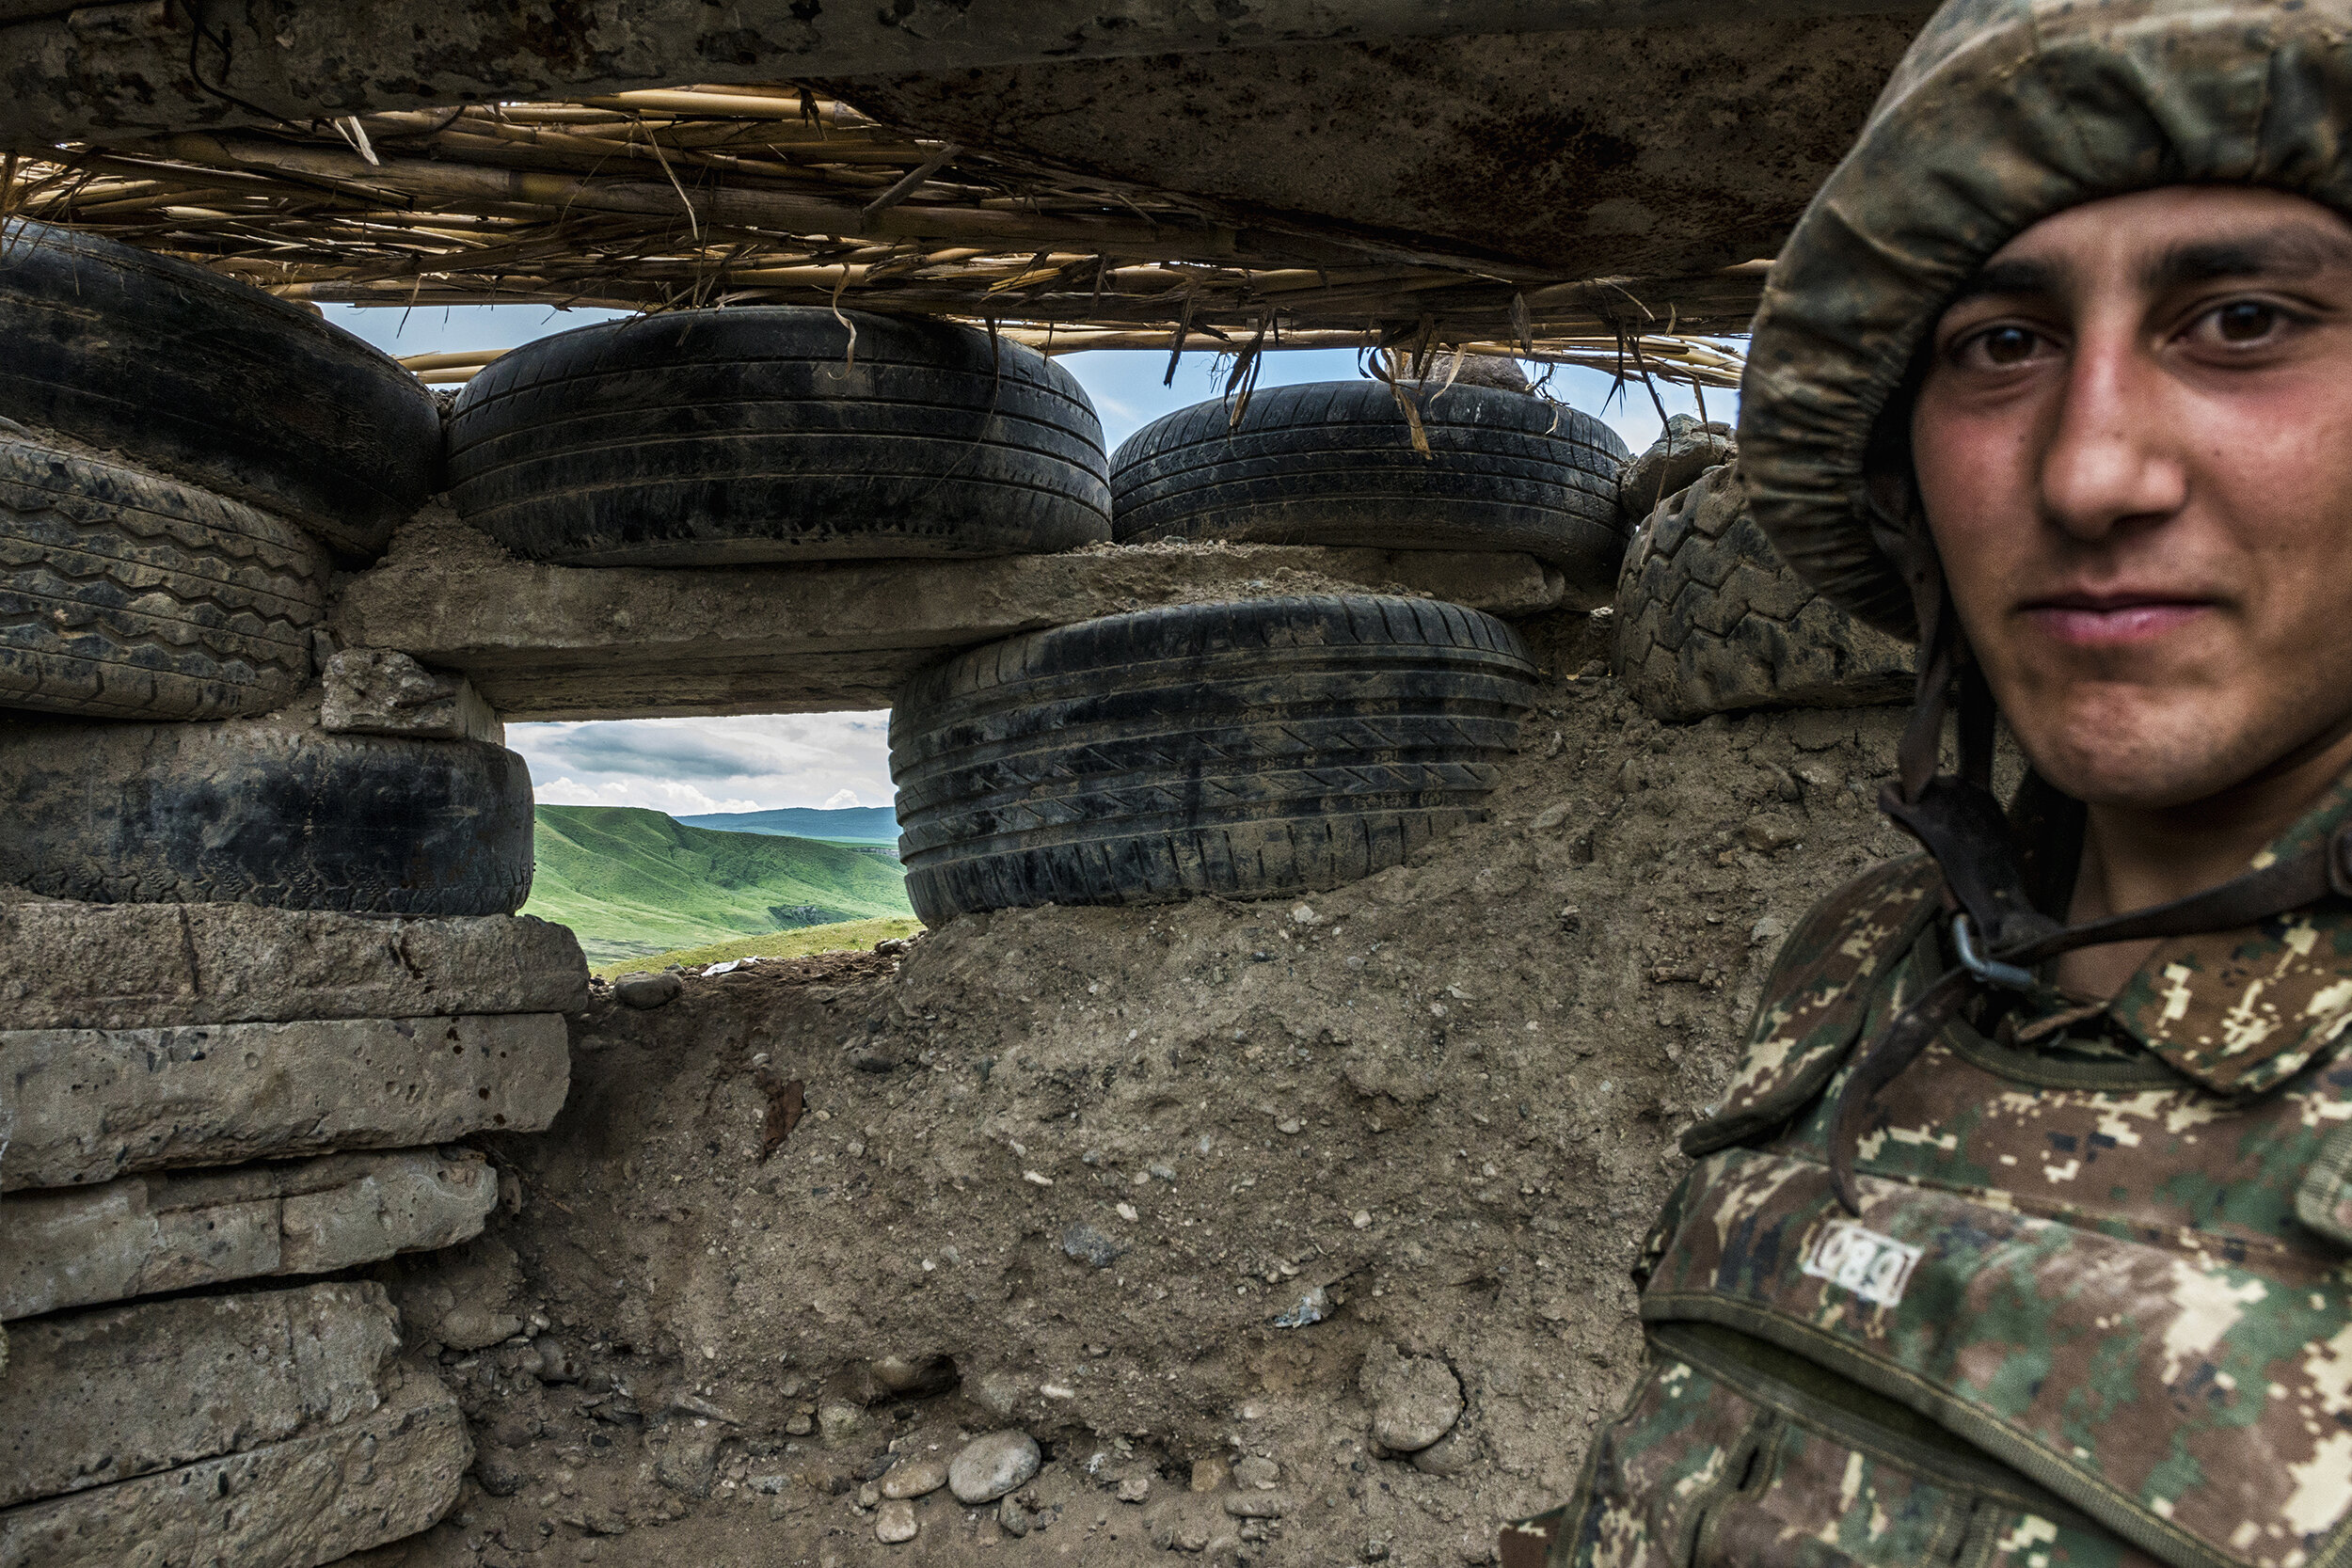  An NKR machine gunner mans a firing position on the Line of Contact in Nagorno-Karabakh.  Perimeter defenses like old tires and tin cans strung in barbed wire were prevalent throughout the trench system with fortifications and mines filling the no m